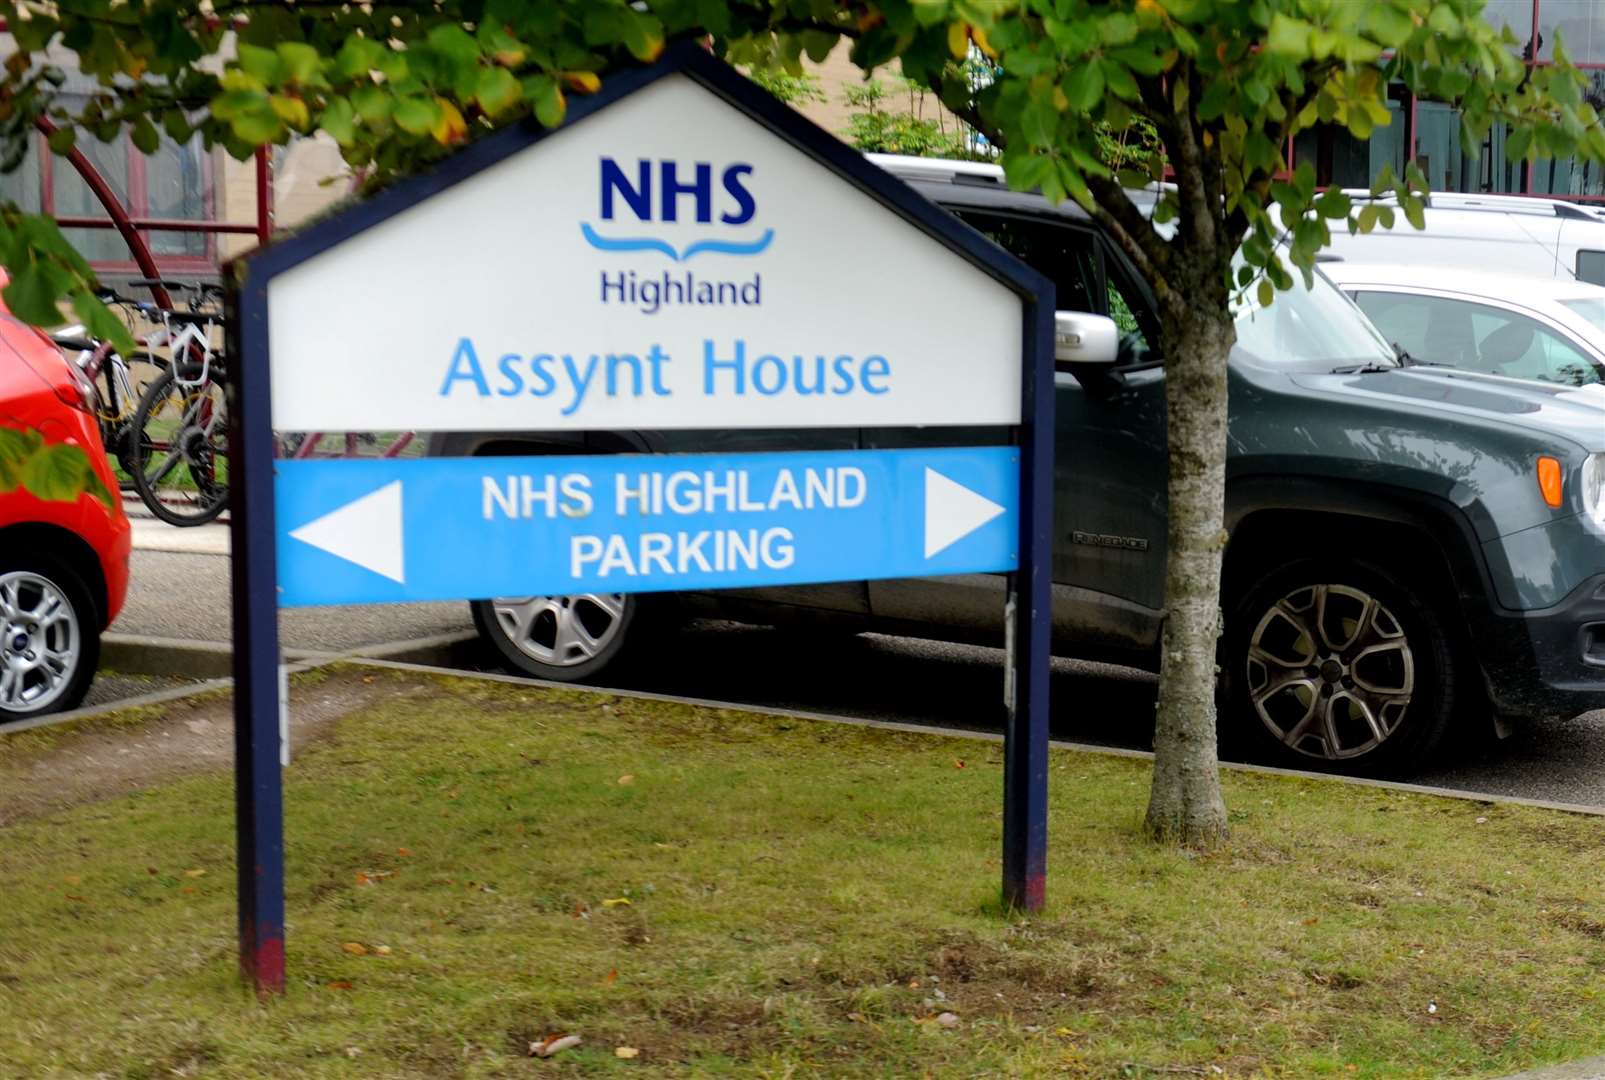 Assynt House, NHS Highland HQ, Inverness.